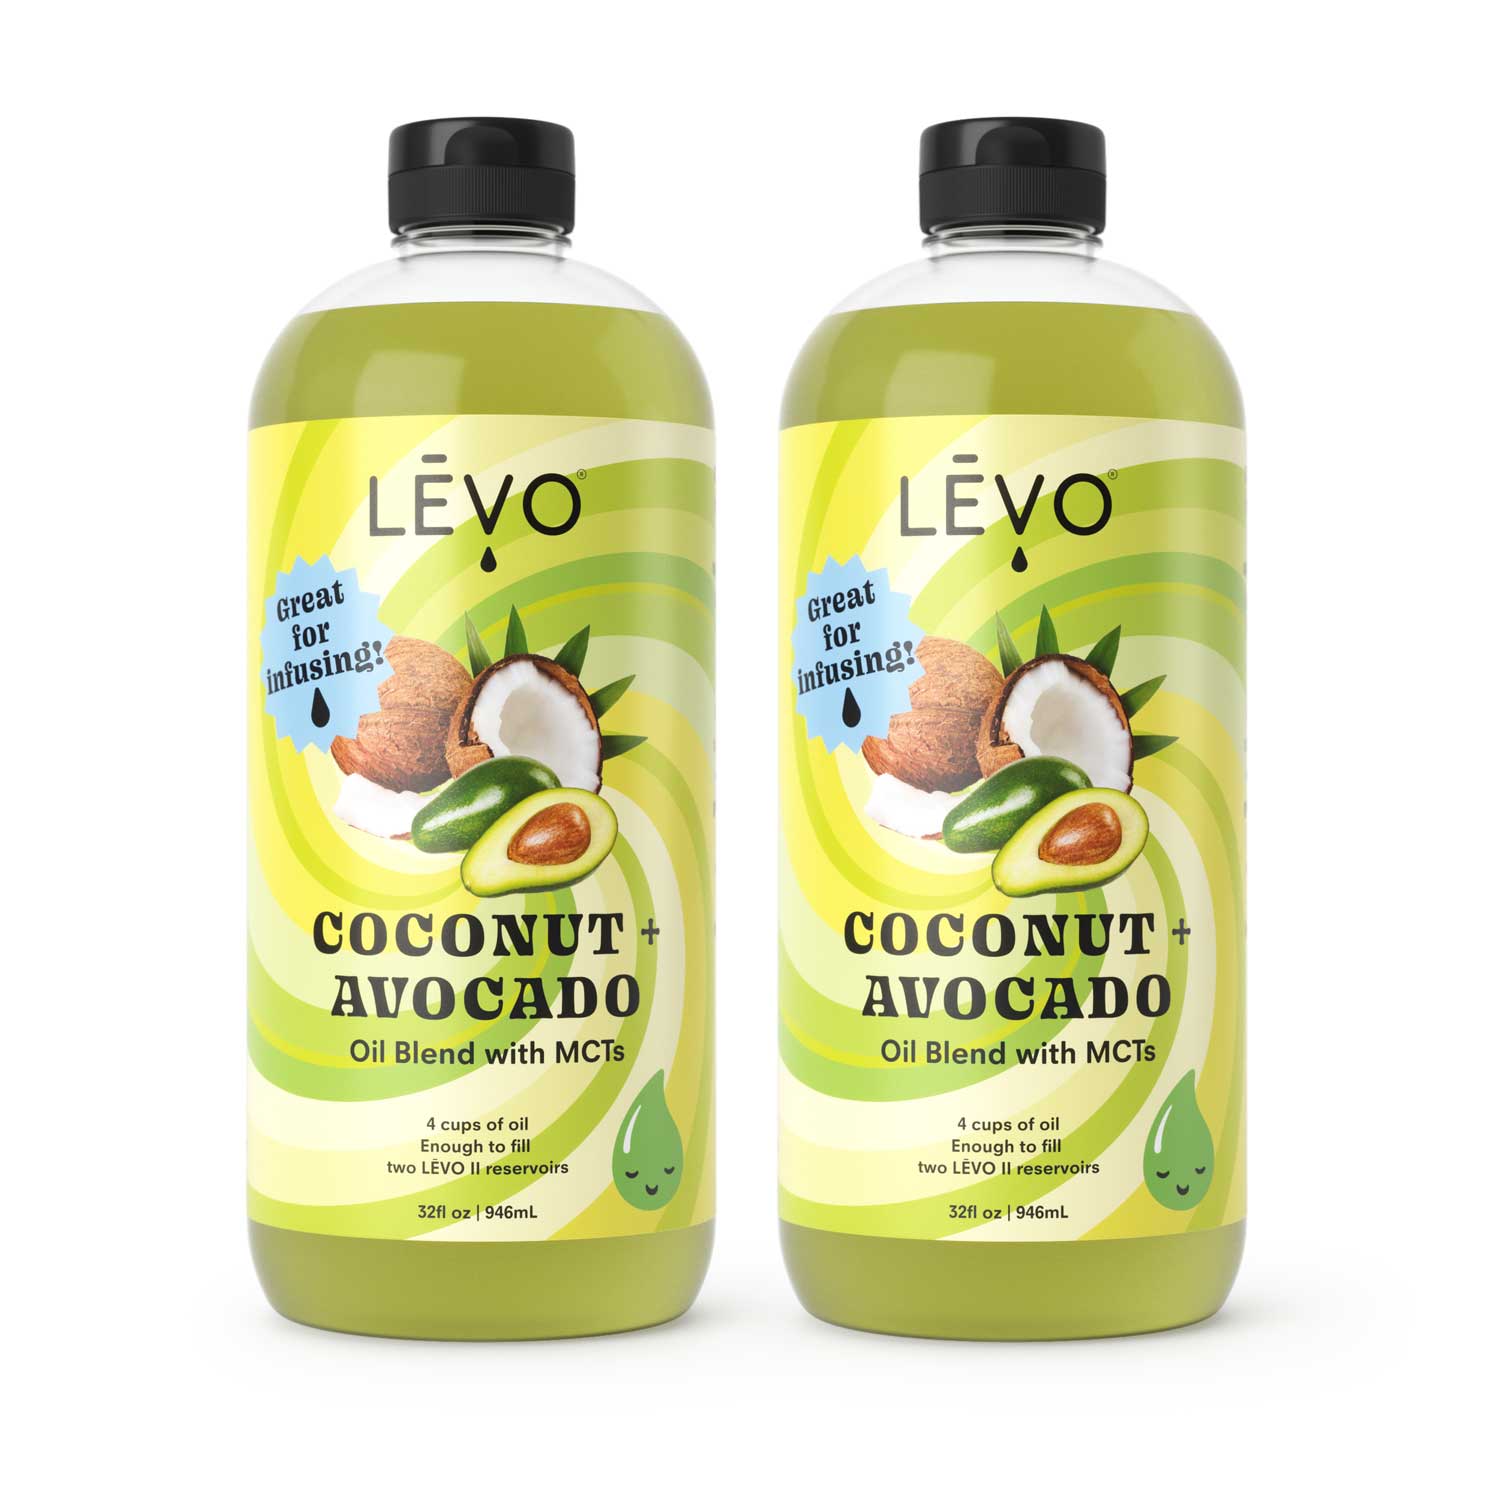 LEVO is your one stop shop for your favorite infusion machine, LEVO II, and the best high quality oils to use with your machine. Try this Coconut plus Avocado oil blend with MCTs. Great for infusing!